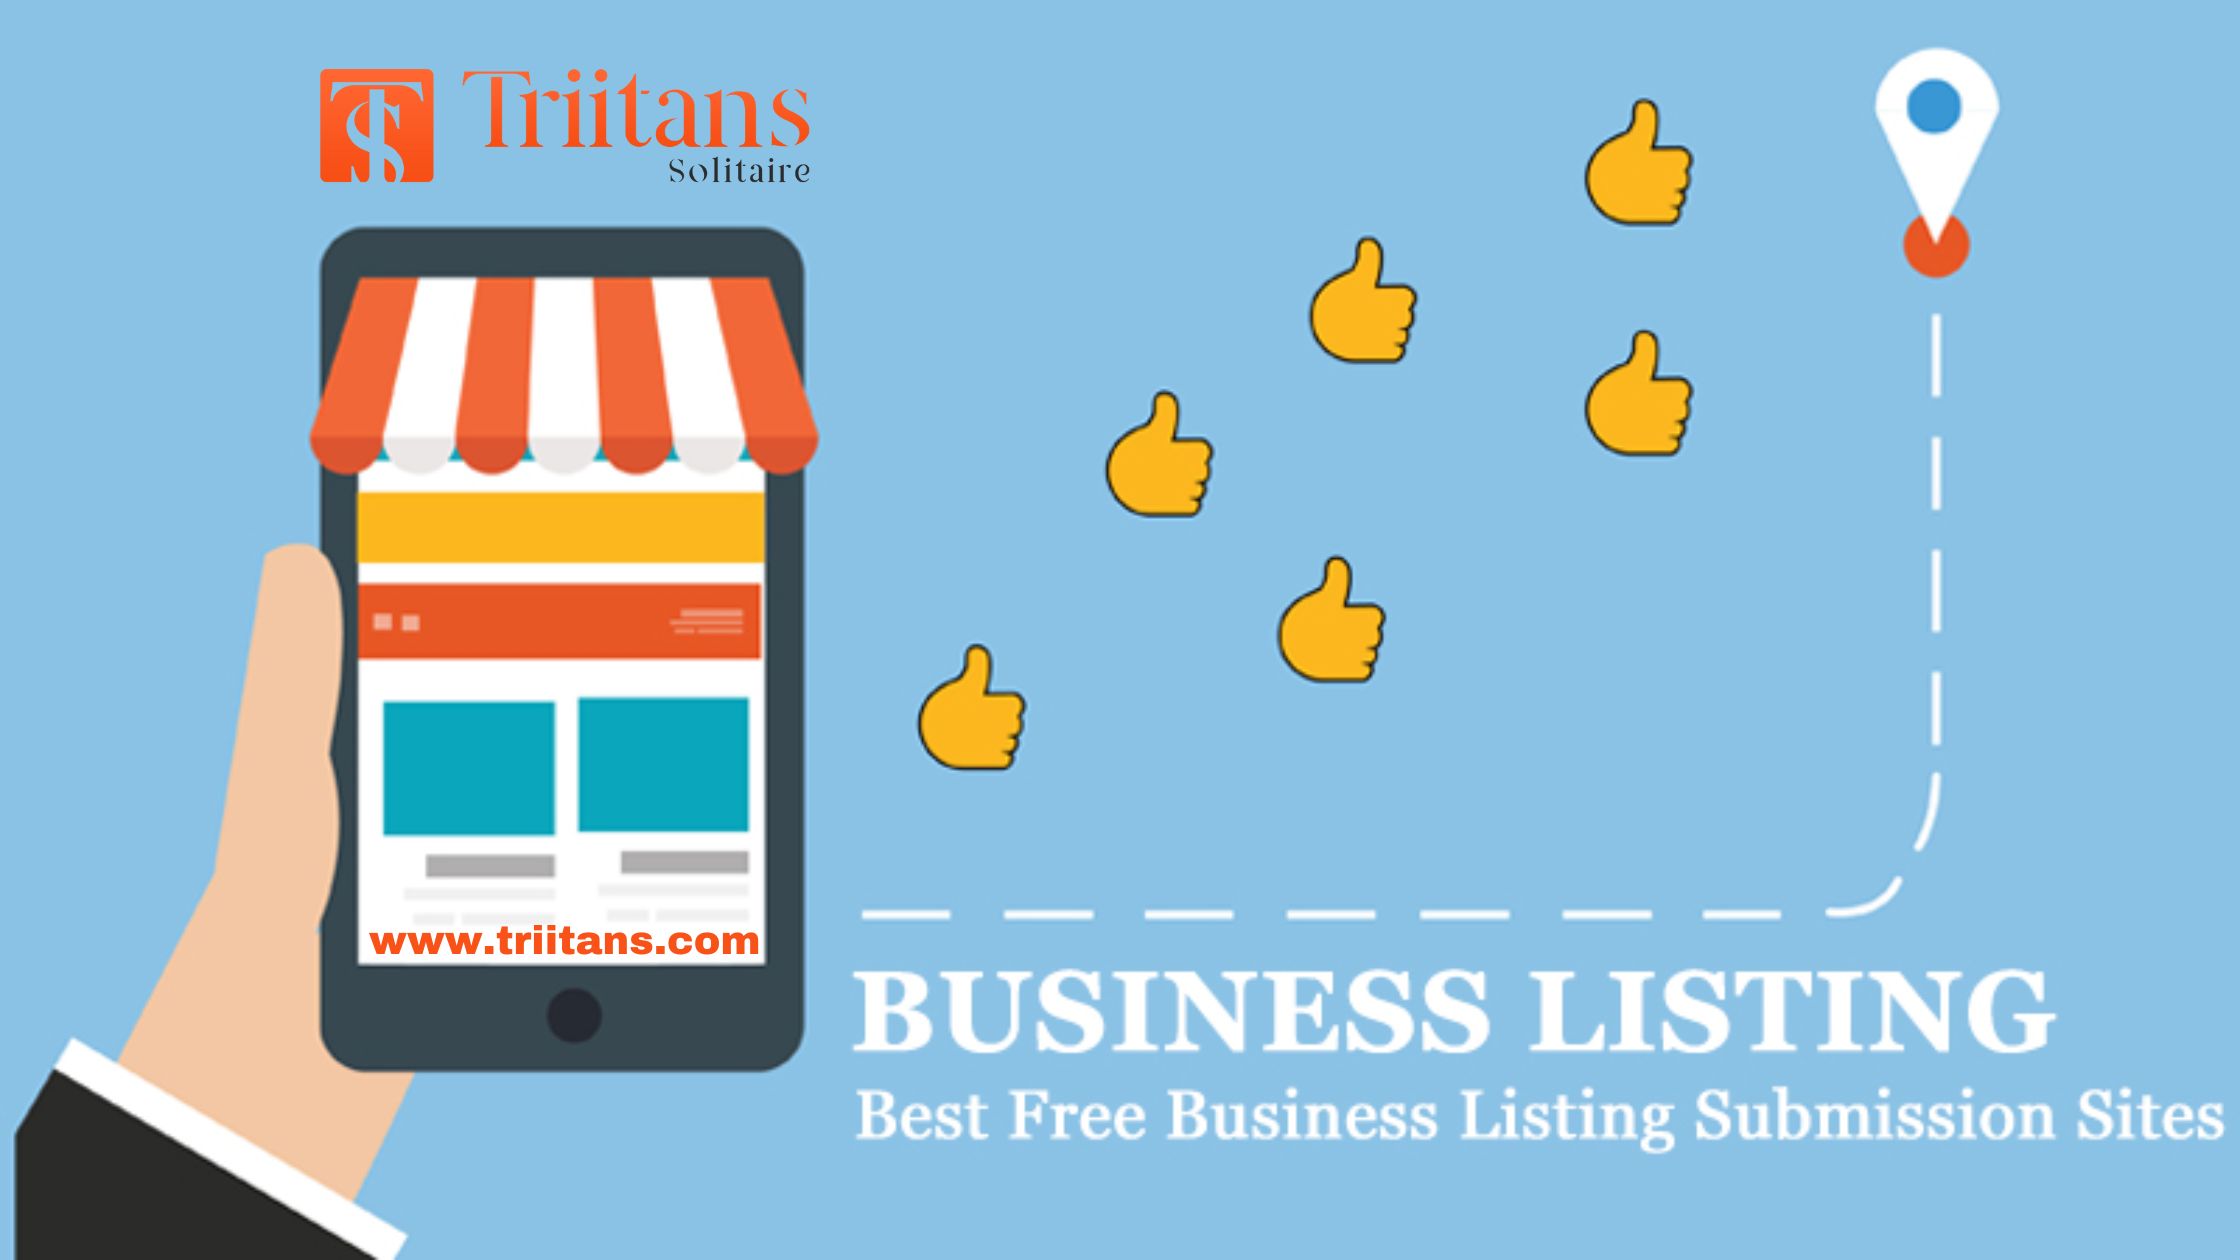 Top Free Business Listing Sites List 2020